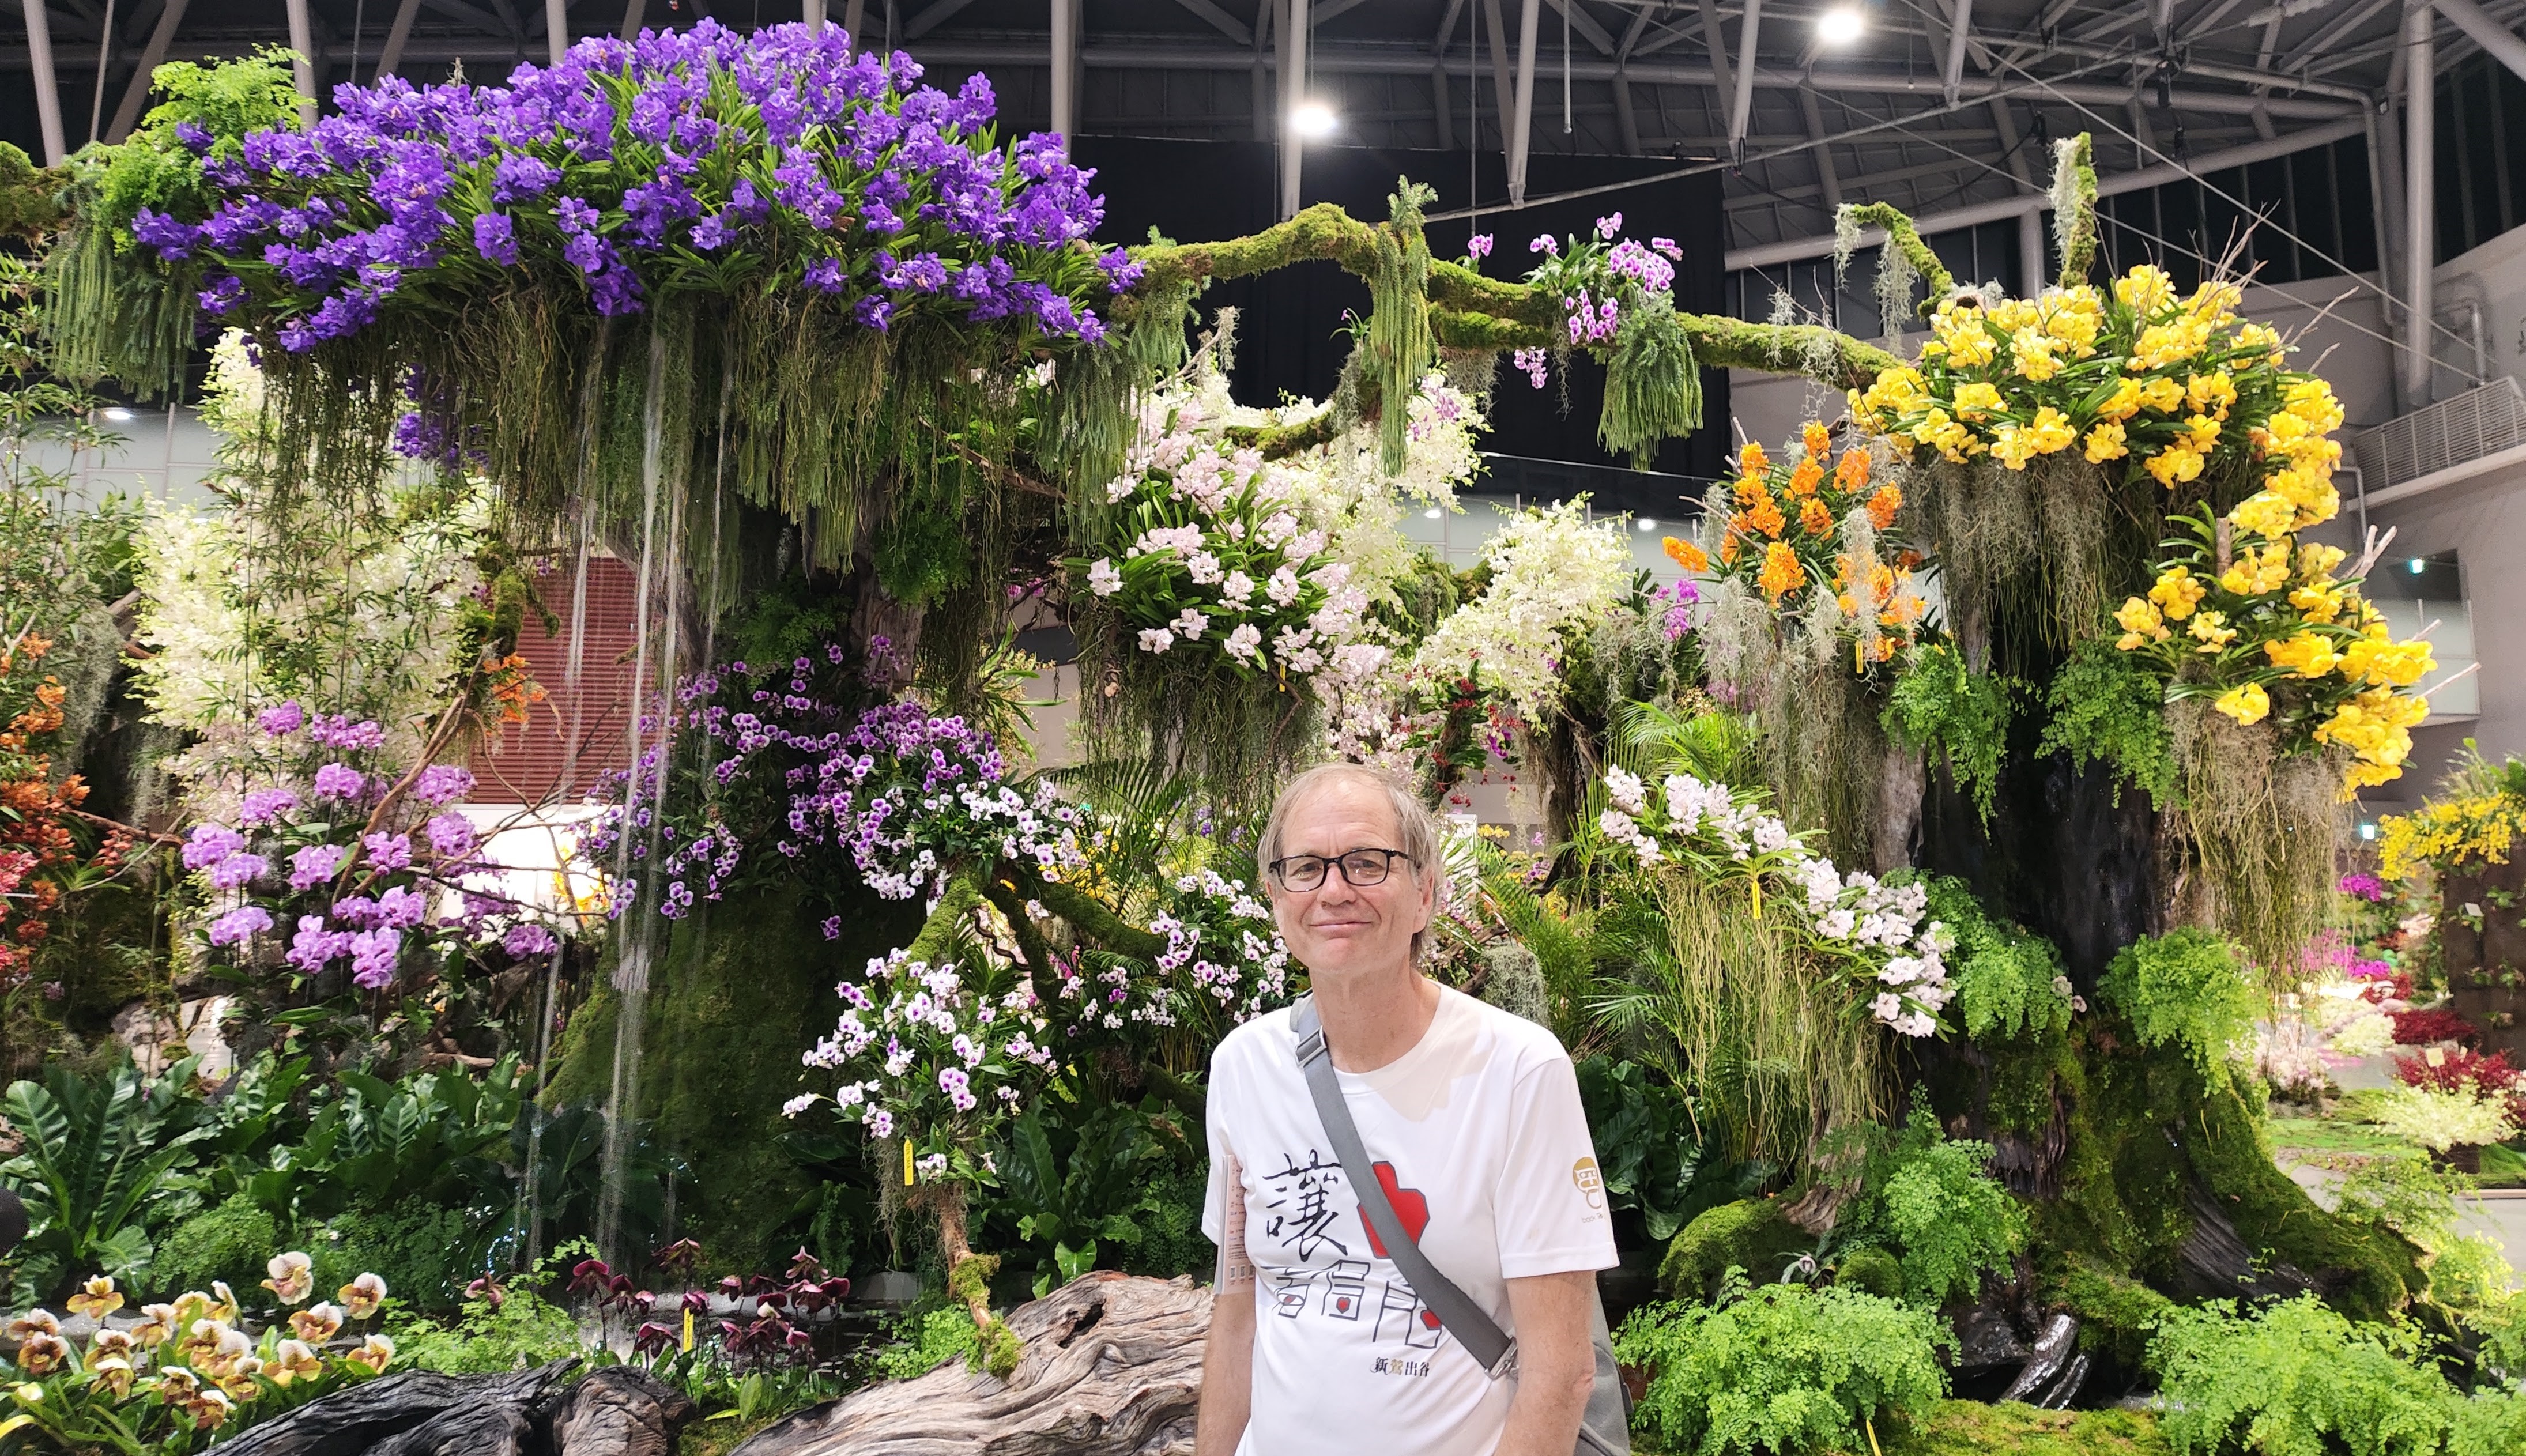 Jon White at the International Orchid Show in Tainan